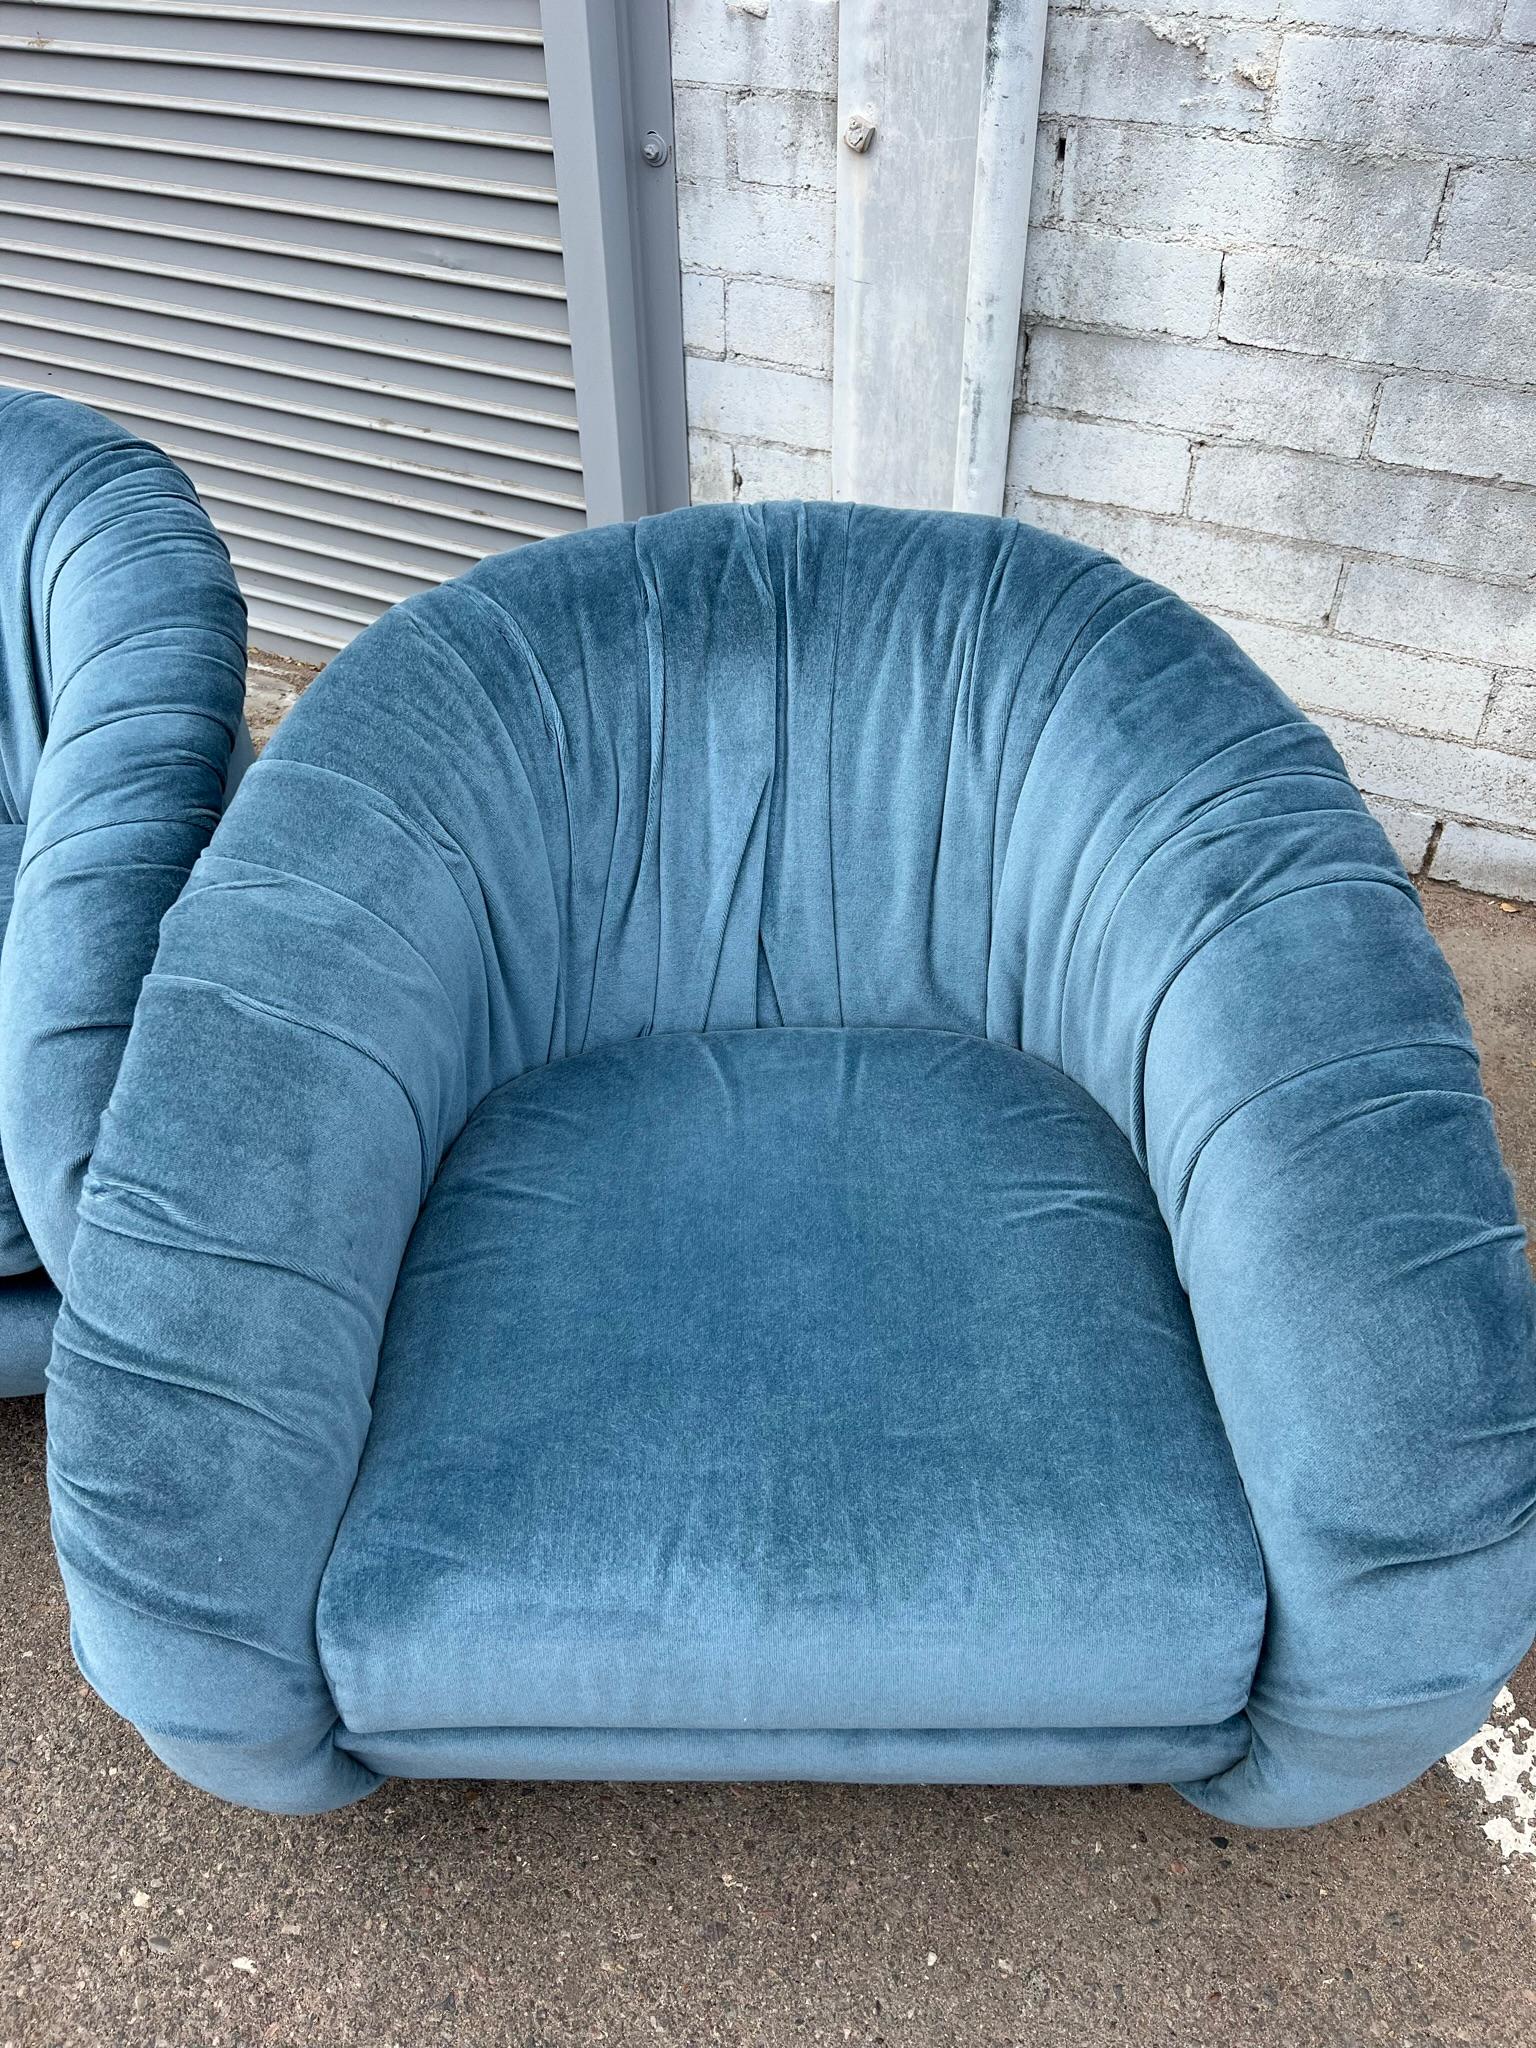 Pair of Large 1980s Swiveling Lounge Chairs 1